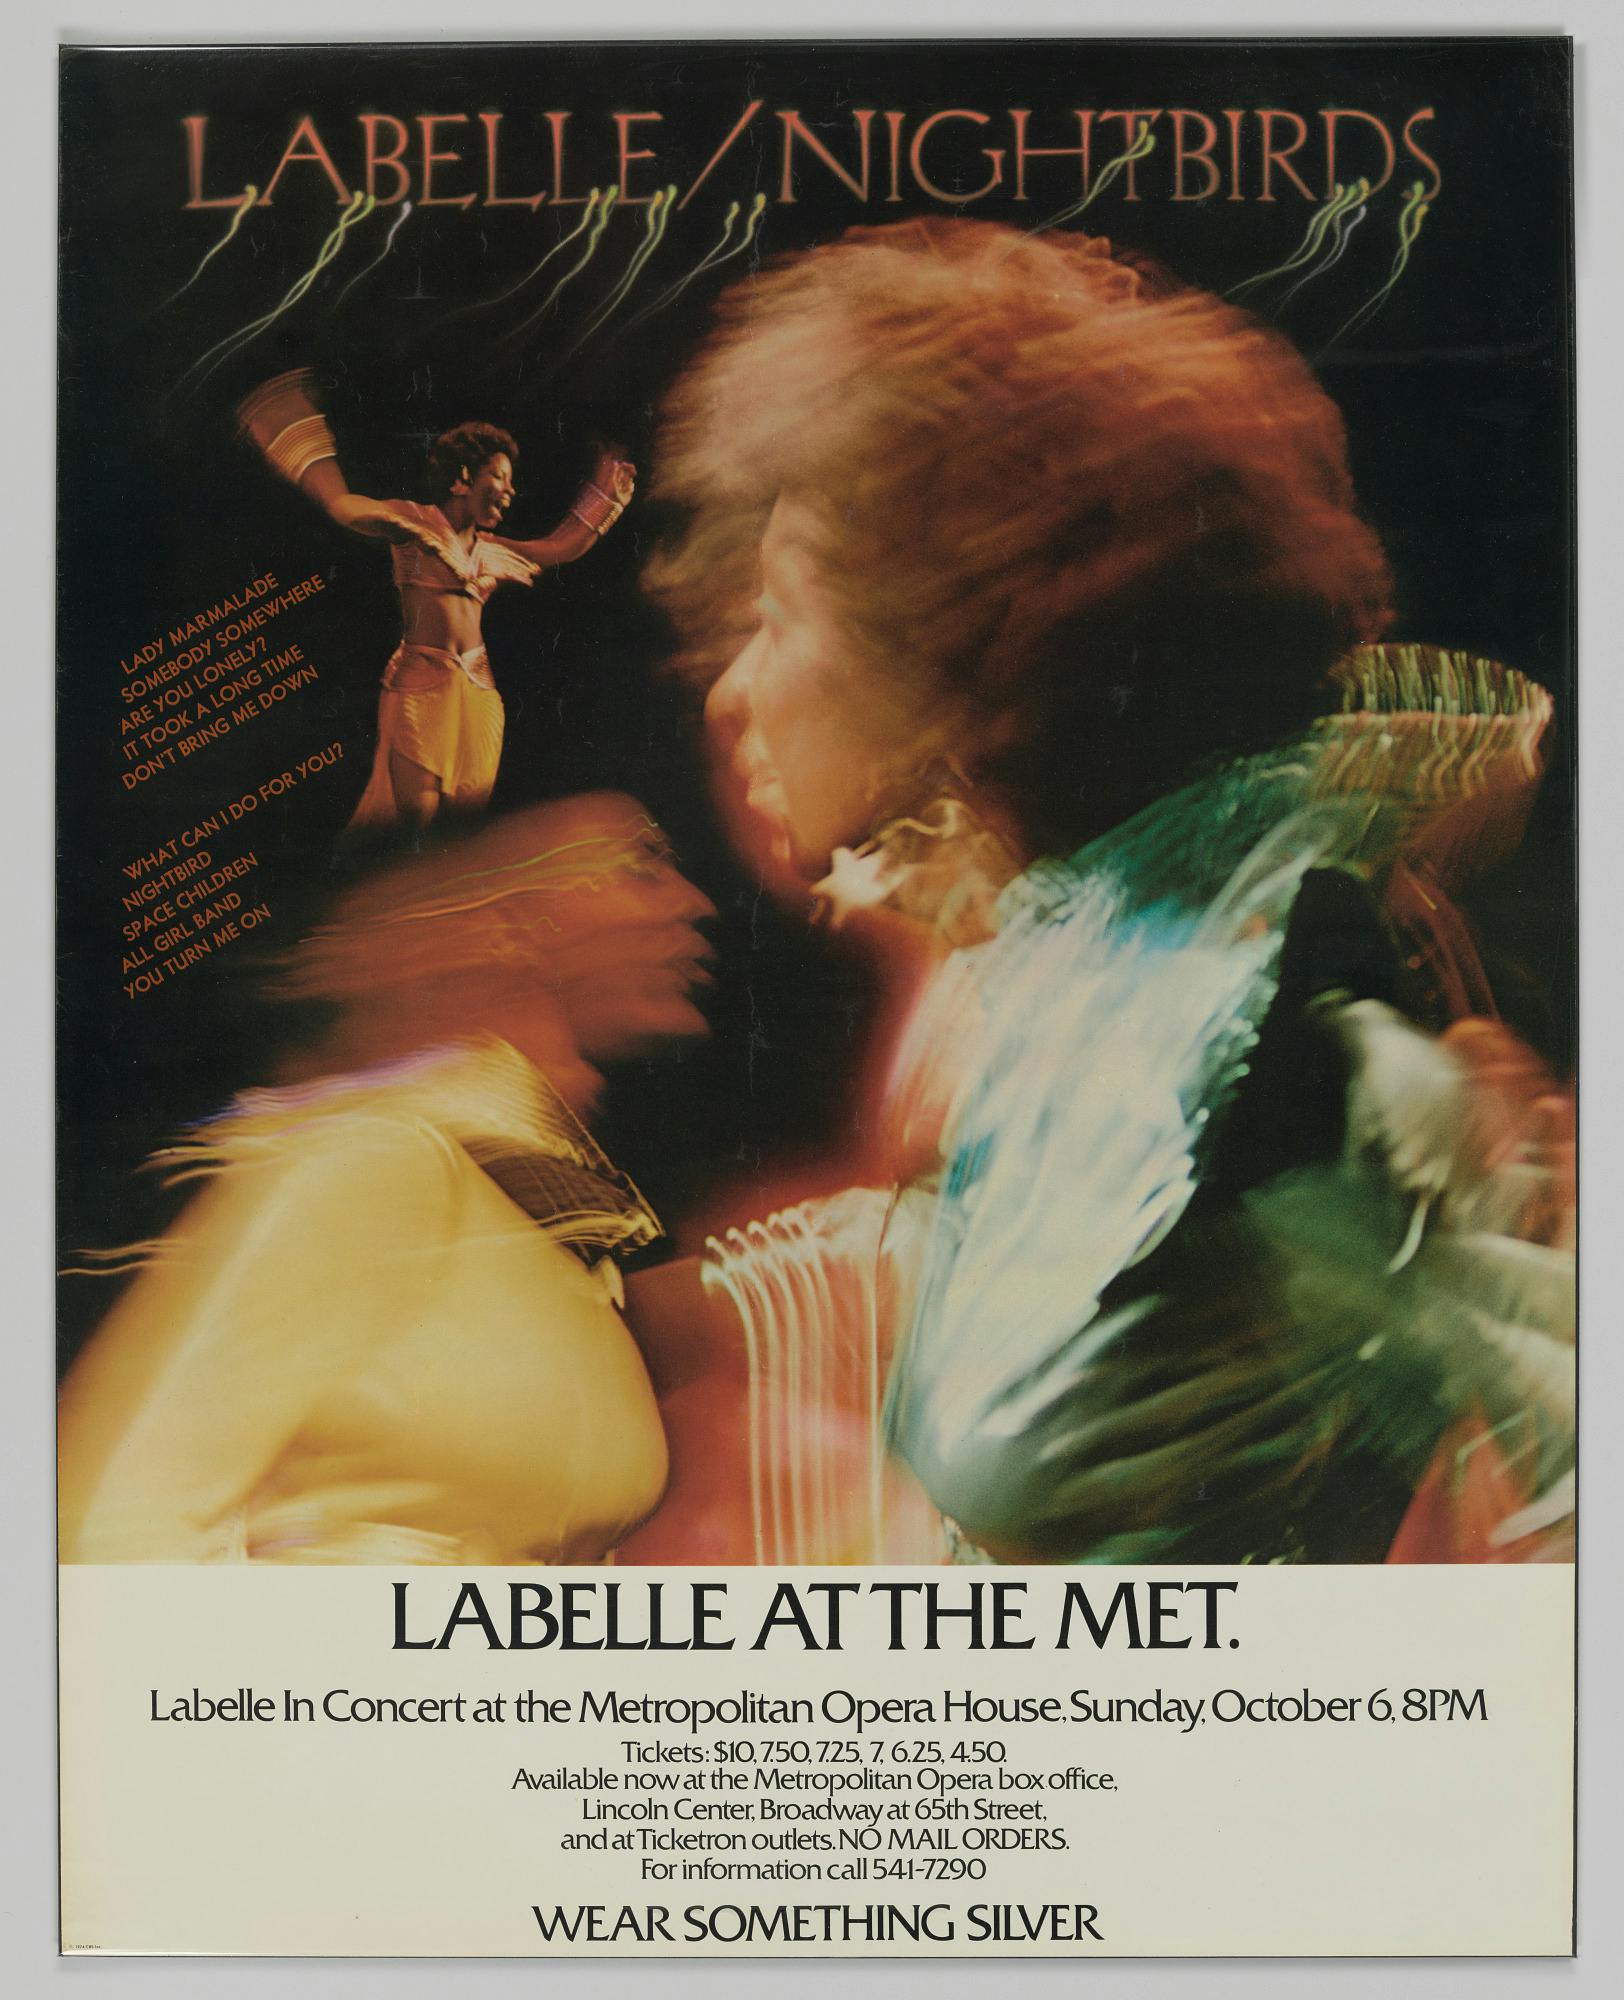 concert poster with blurred images of Patti Labelle with text that reads "Labelle / Nightbirds. Labelle at the Met"... followed by small text with venue details